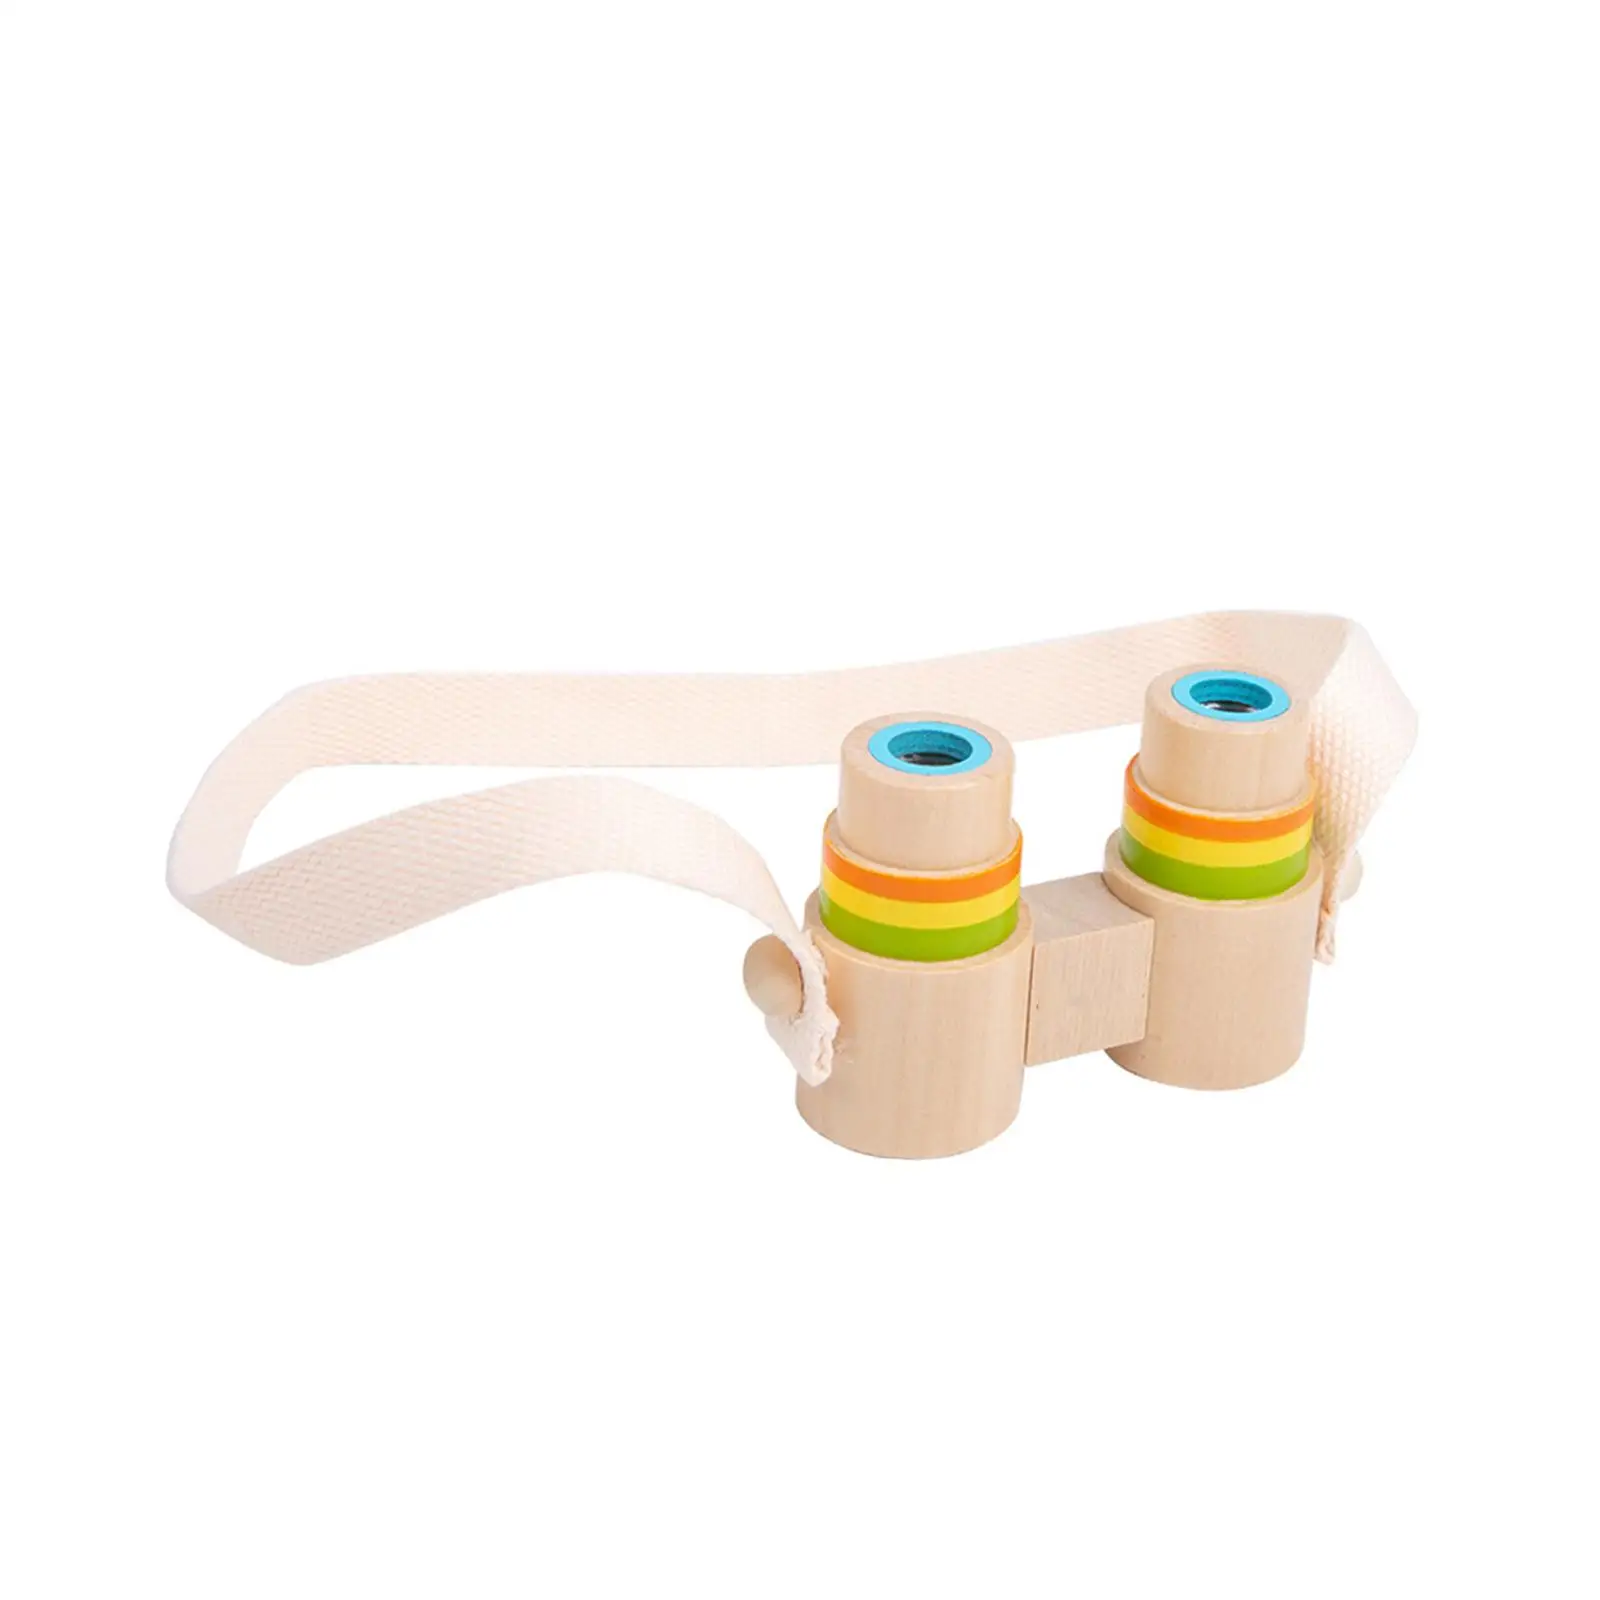 Wooden Binoculars Toy and Strap Children Magnification Toy Outdoor Toys for Boys Girls Toddlers Hiking Exploration